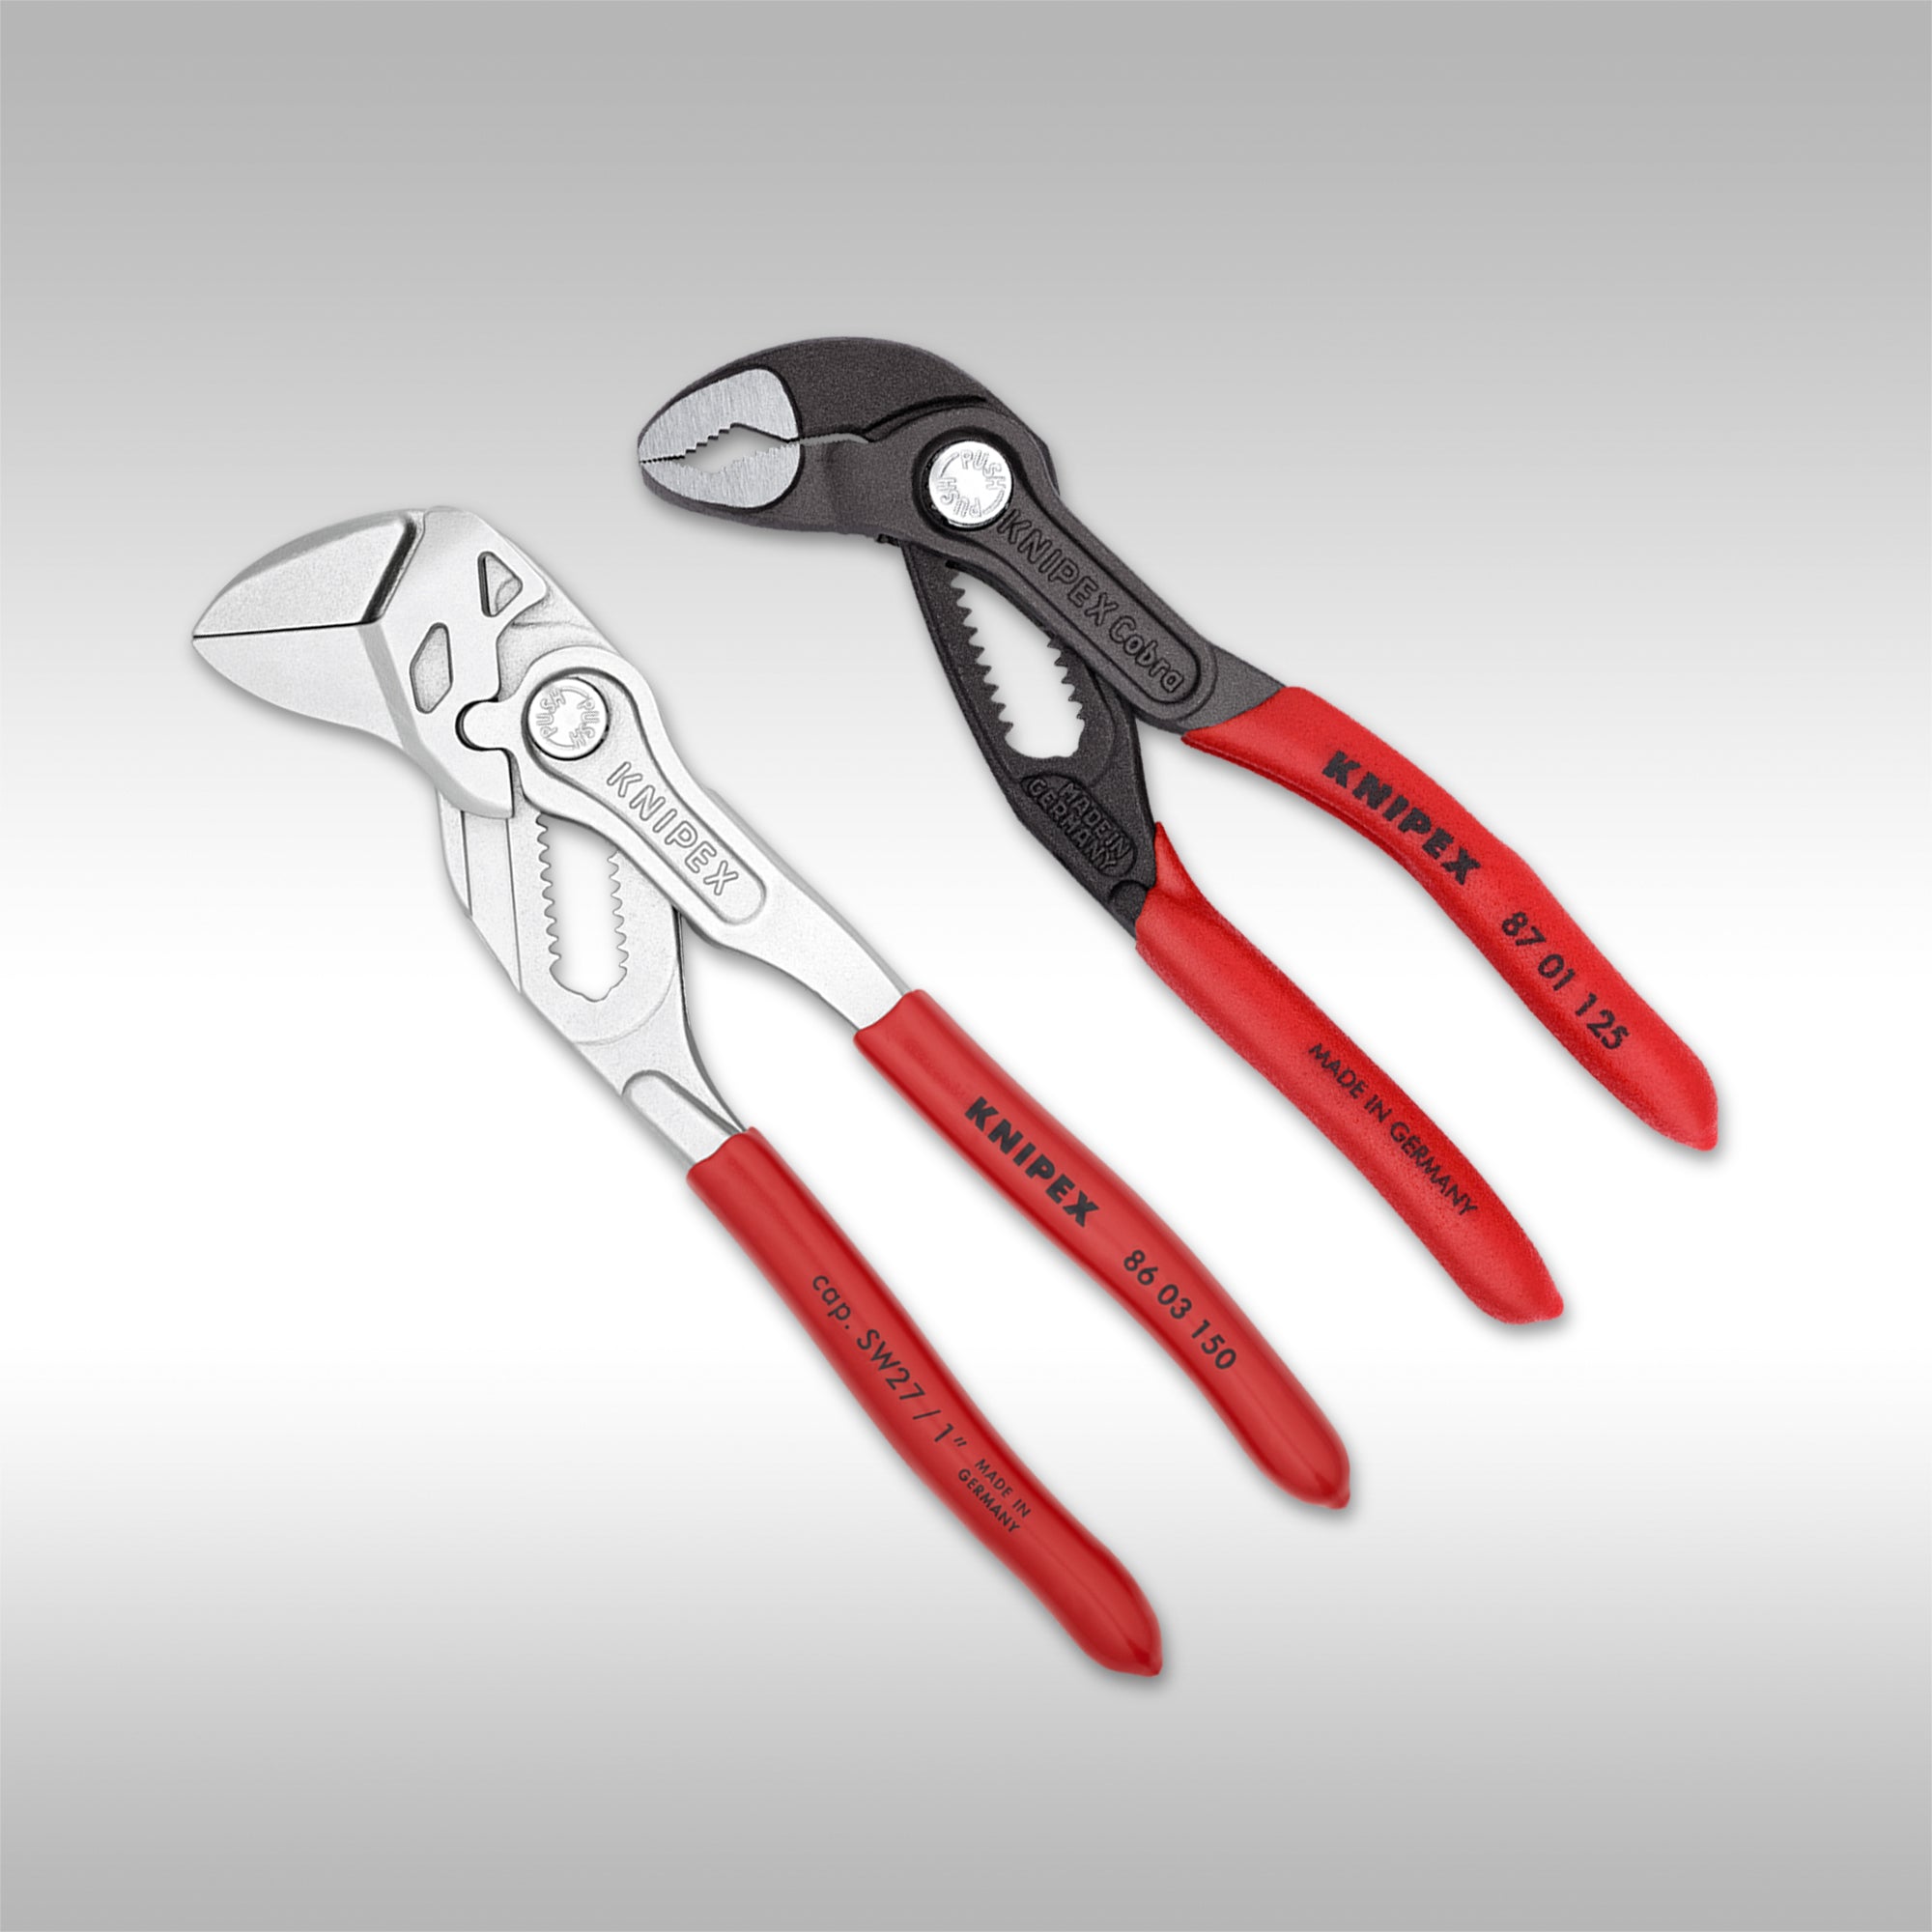 KNIPEX - 2 PIECE MINI PLIERS IN BELT POUCH - 6 PLIERS WRENCH & 5